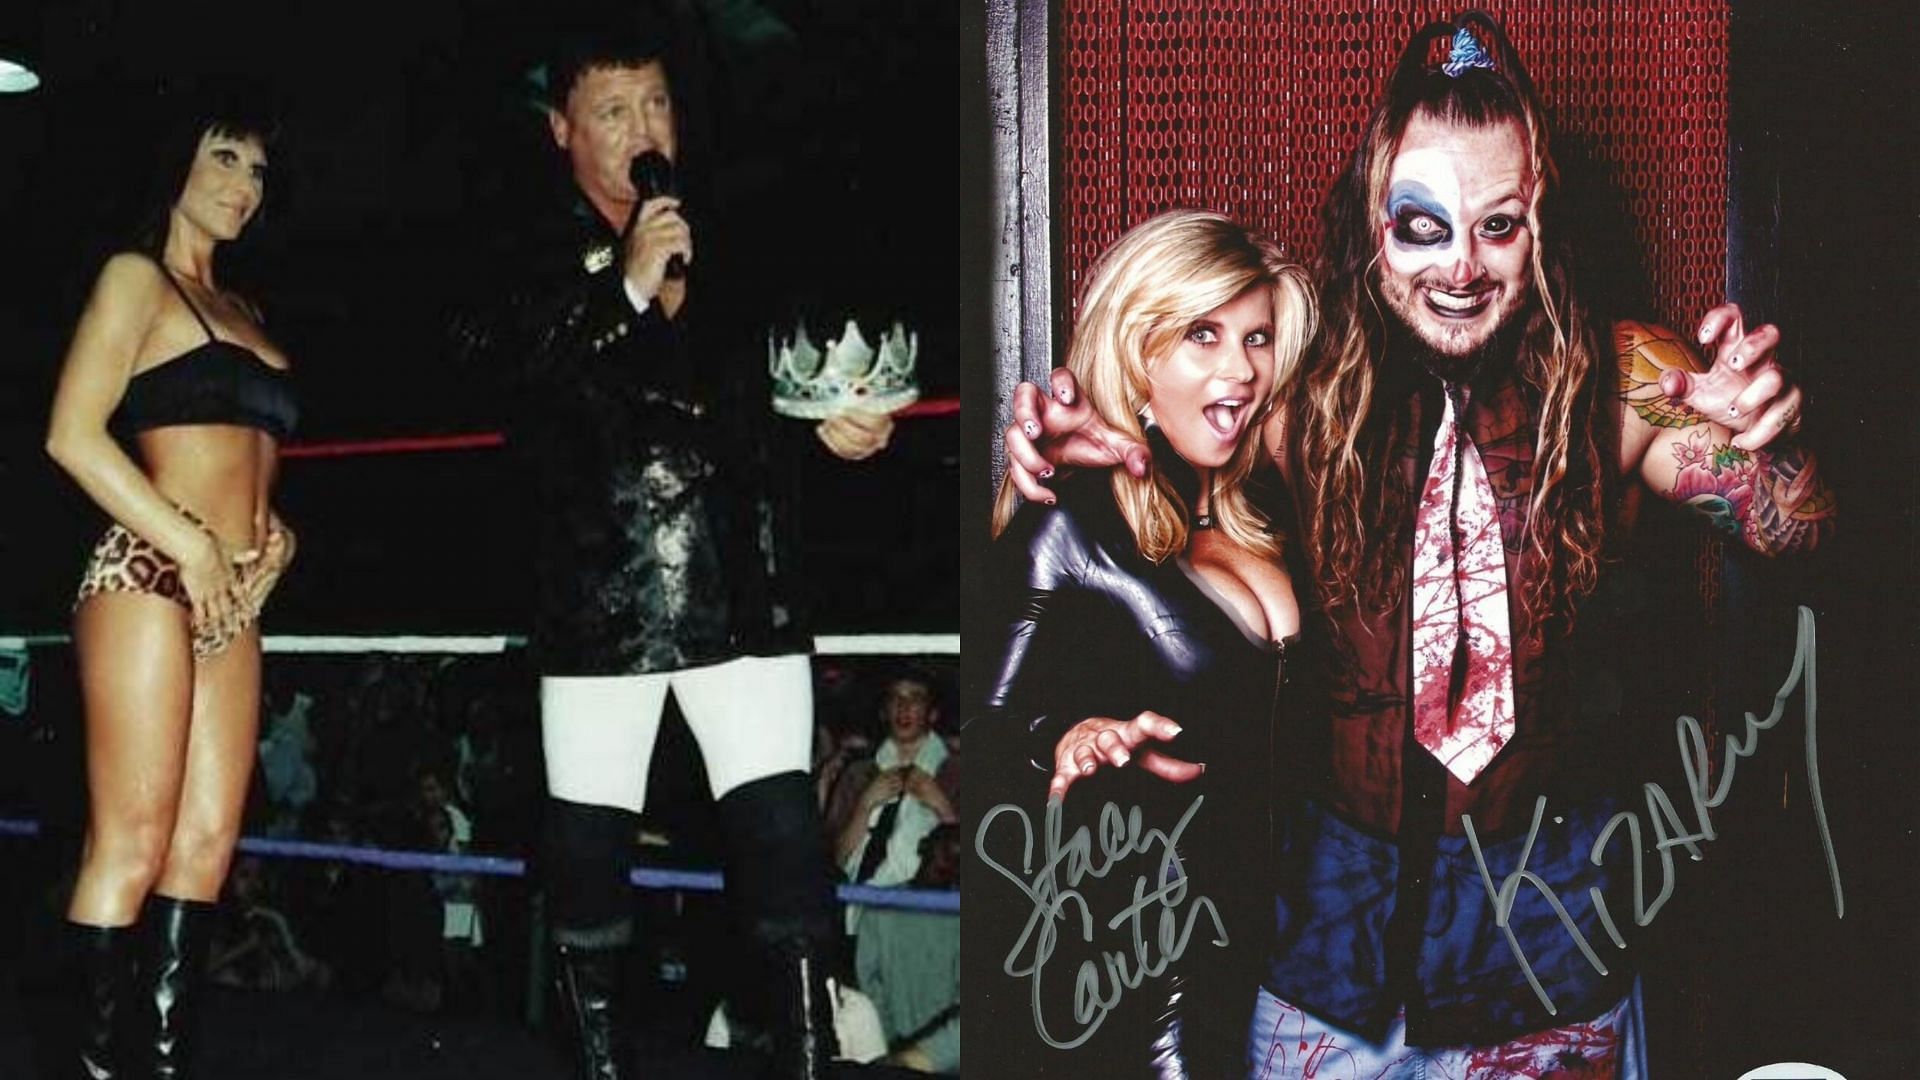 Stacy Carter with Jerry Lawler (left) and Kizarny (right)